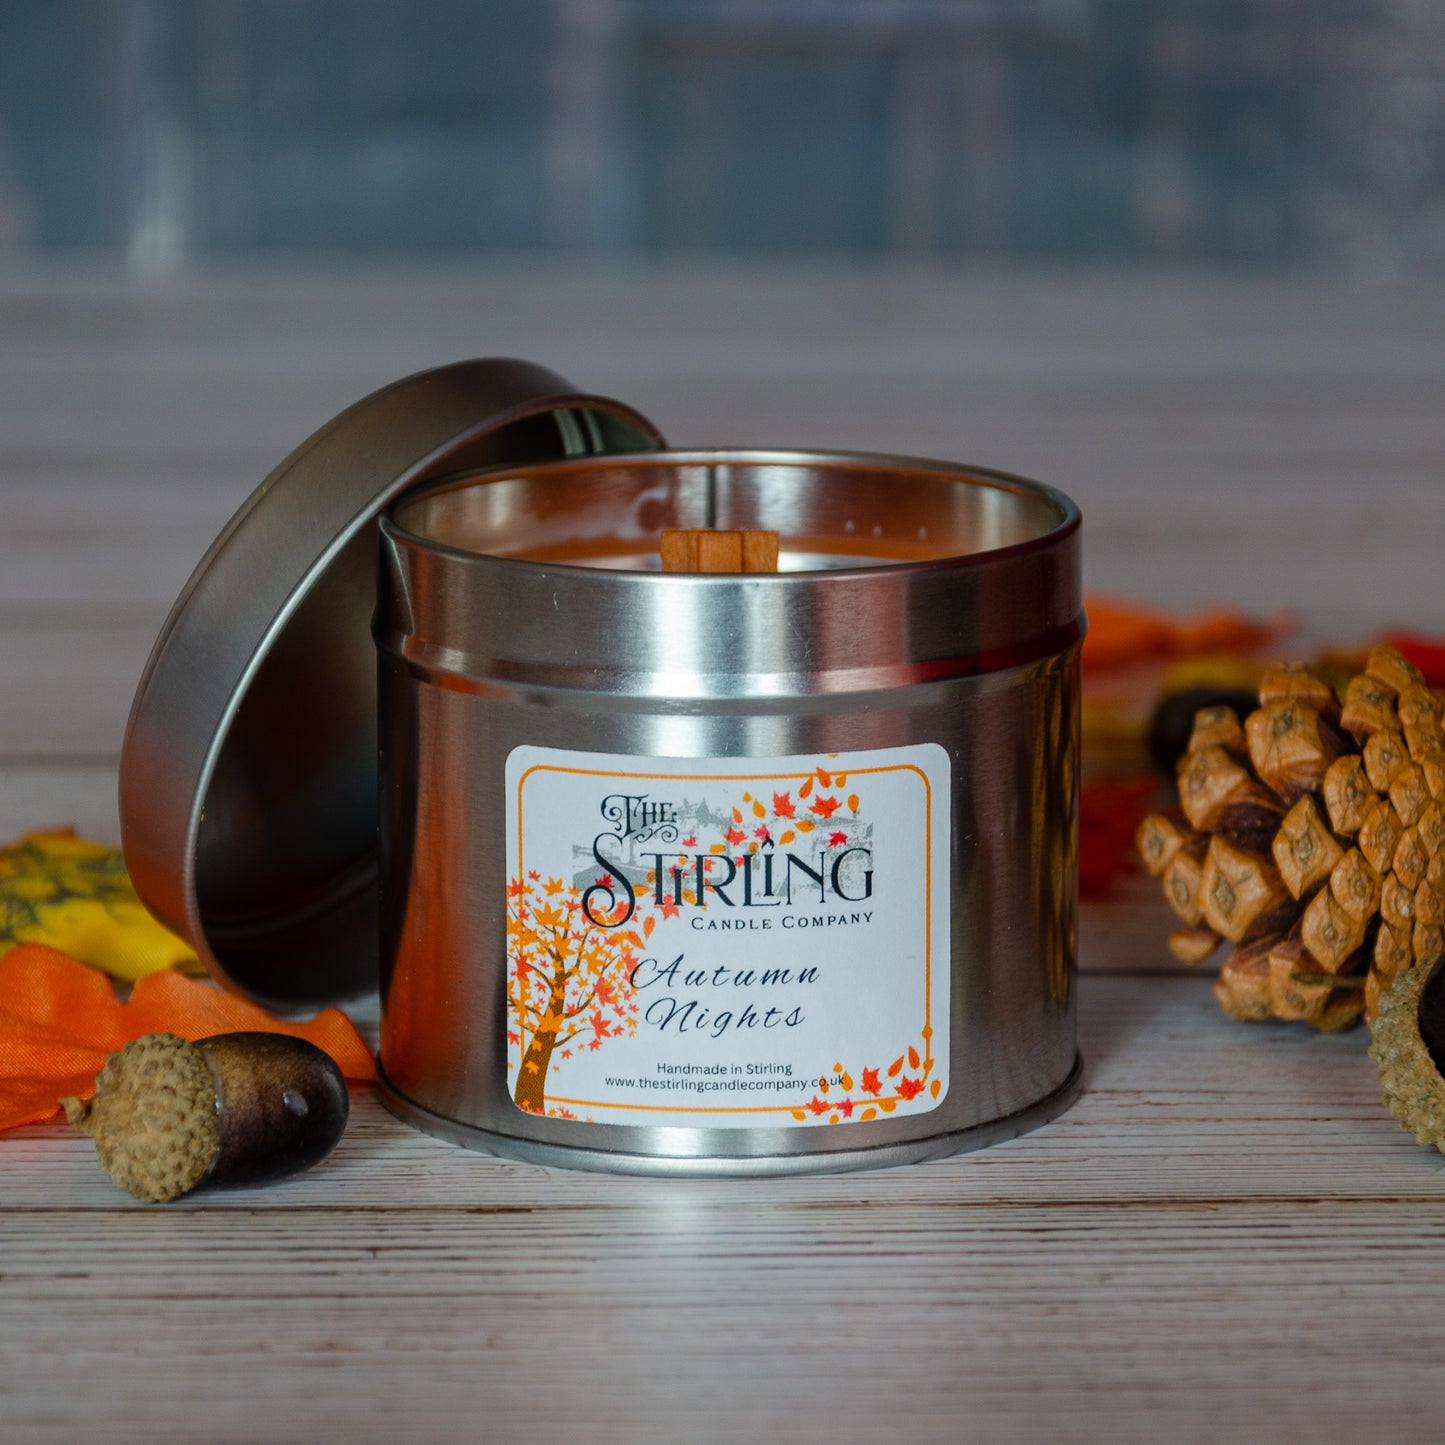 Autumn Nights wooden wick candle